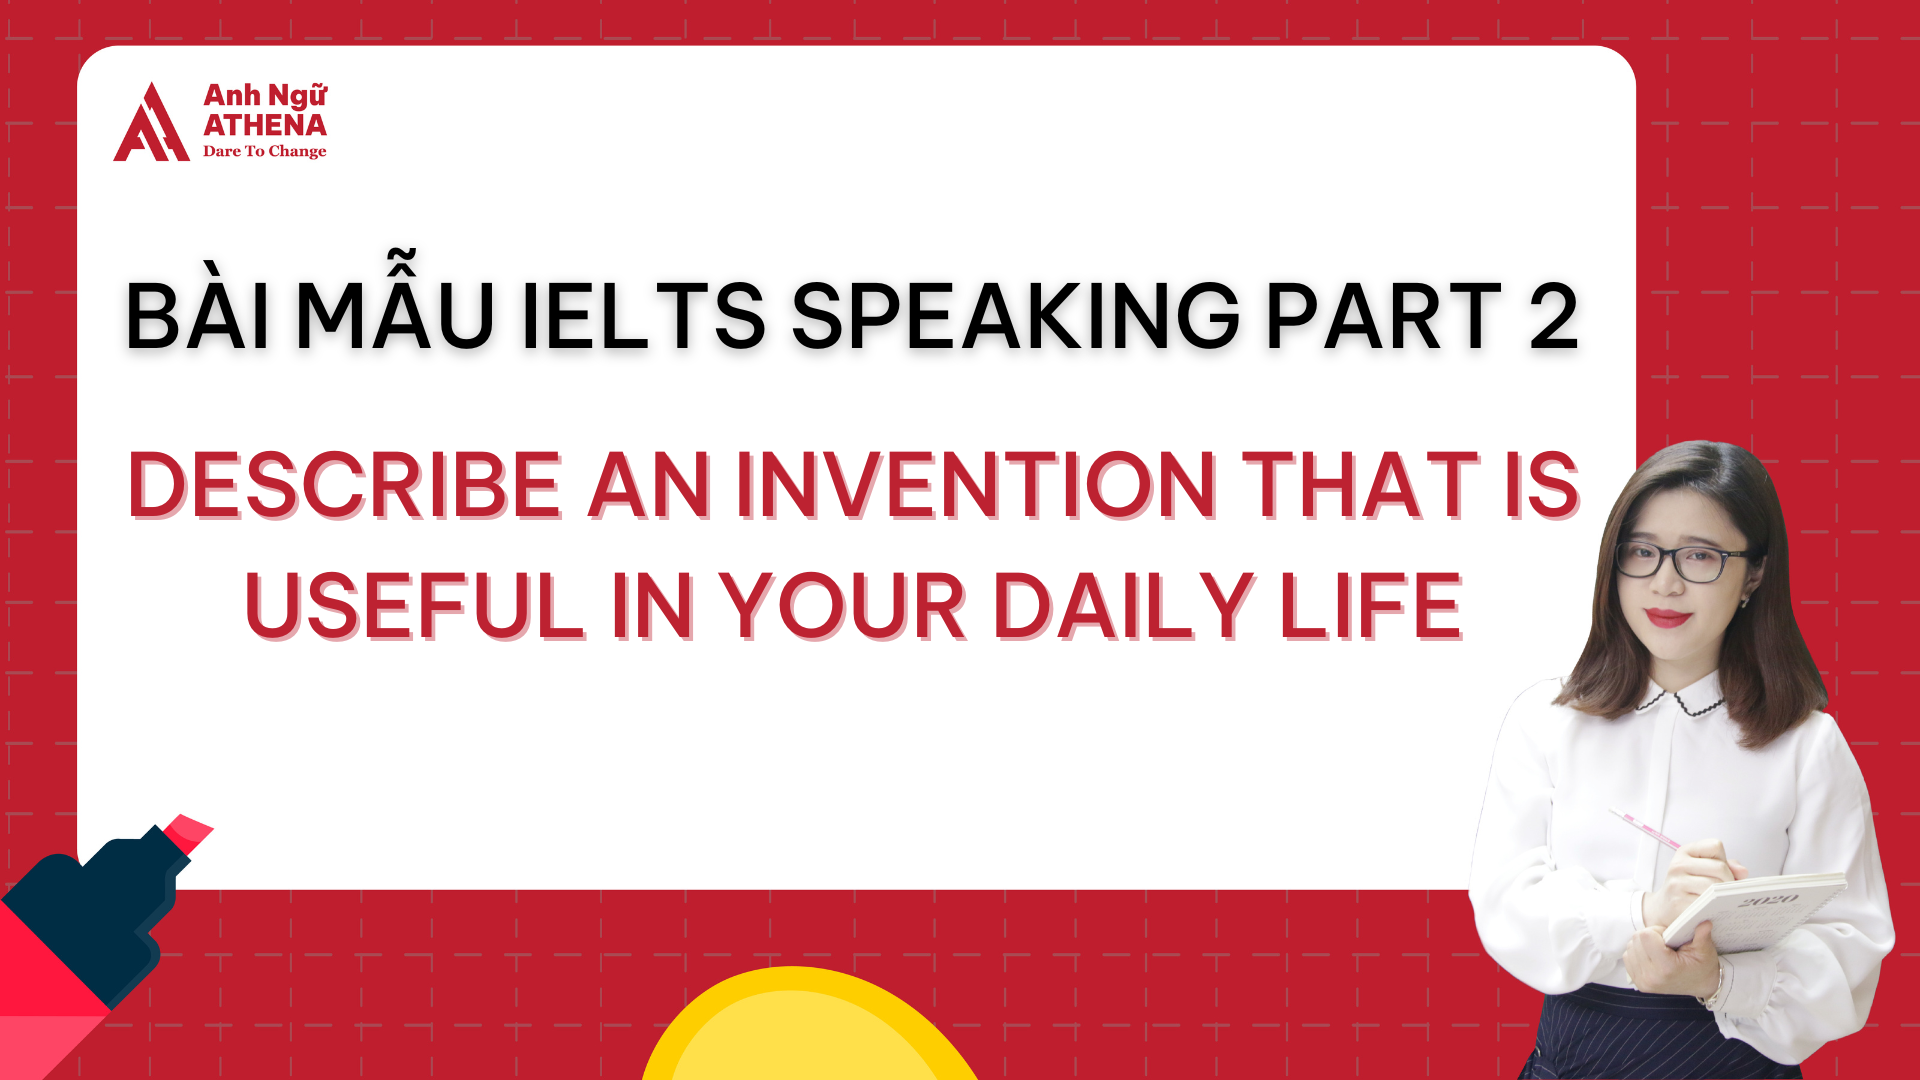 Bài mẫu IELTS Speaking Part 2 - Topic: Describe an invention that is useful in your daily life